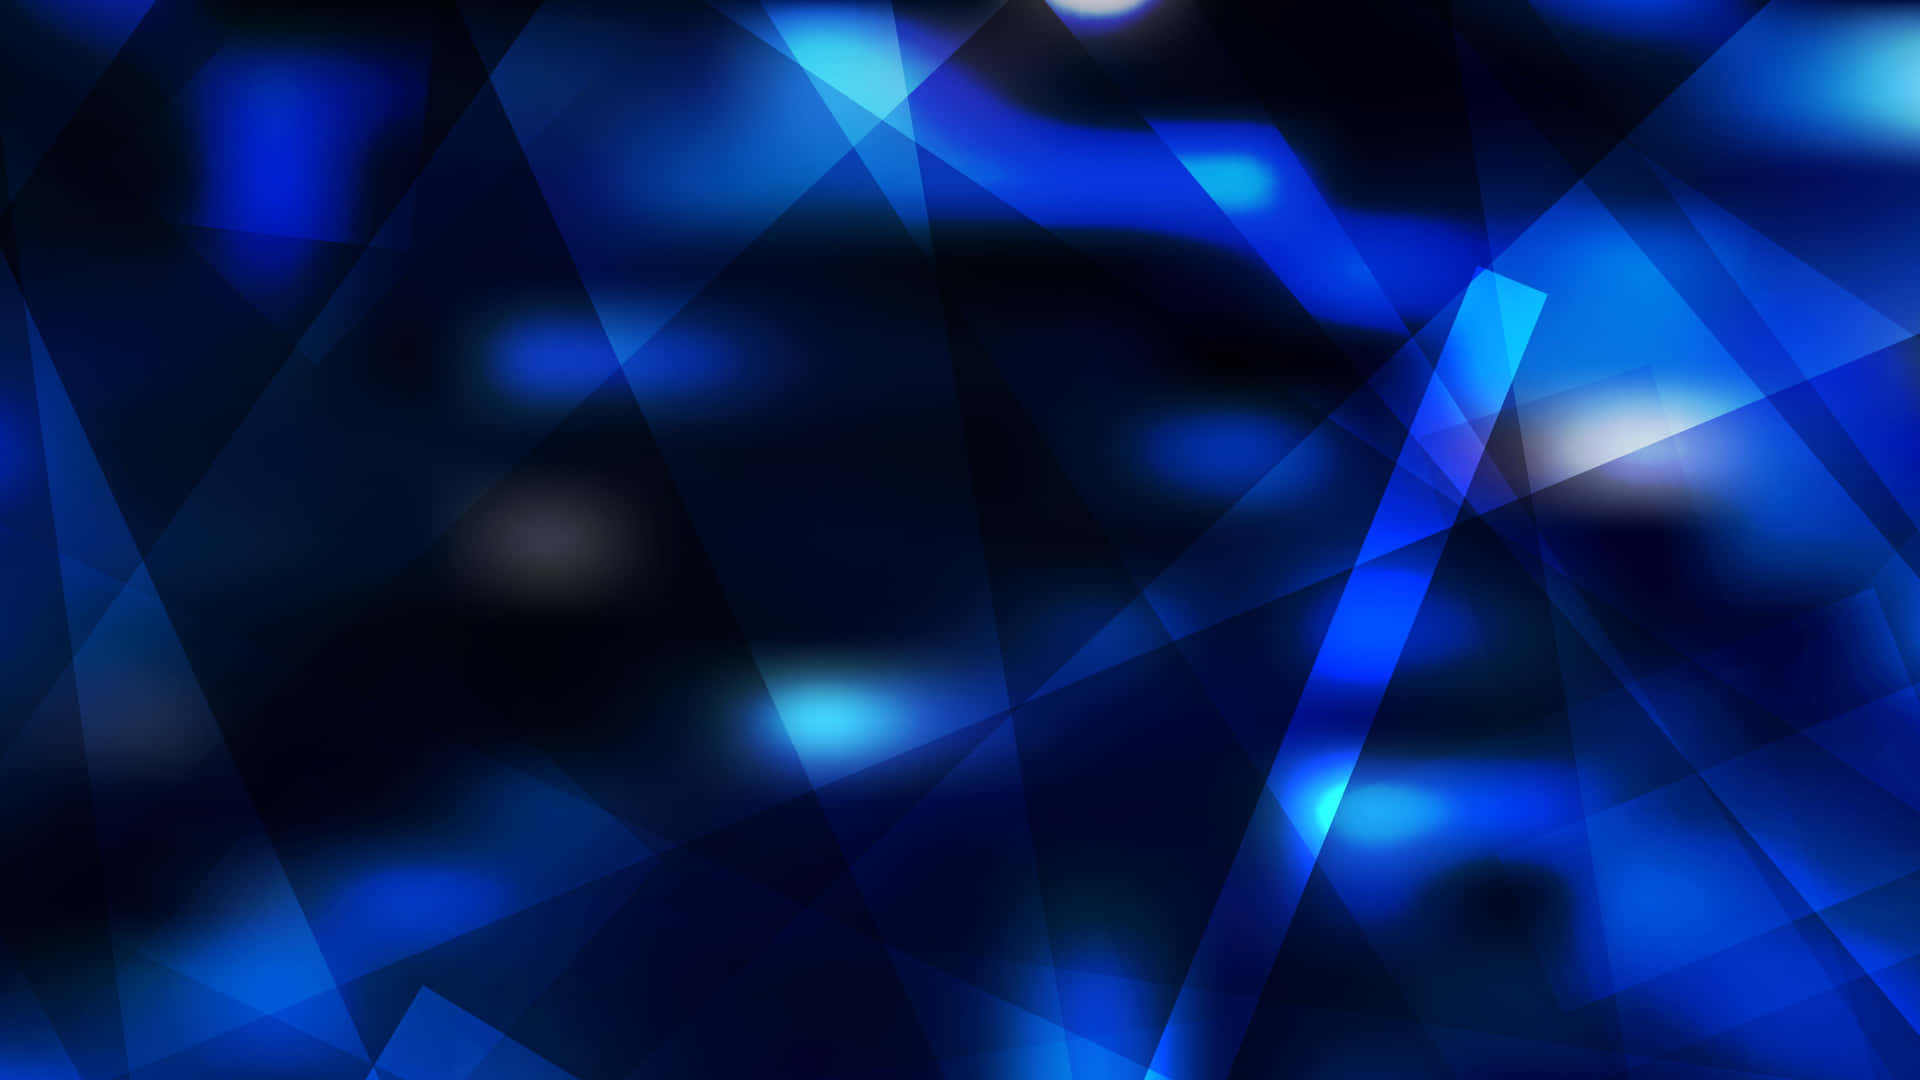 Blue Abstract Background With Lights And Triangles